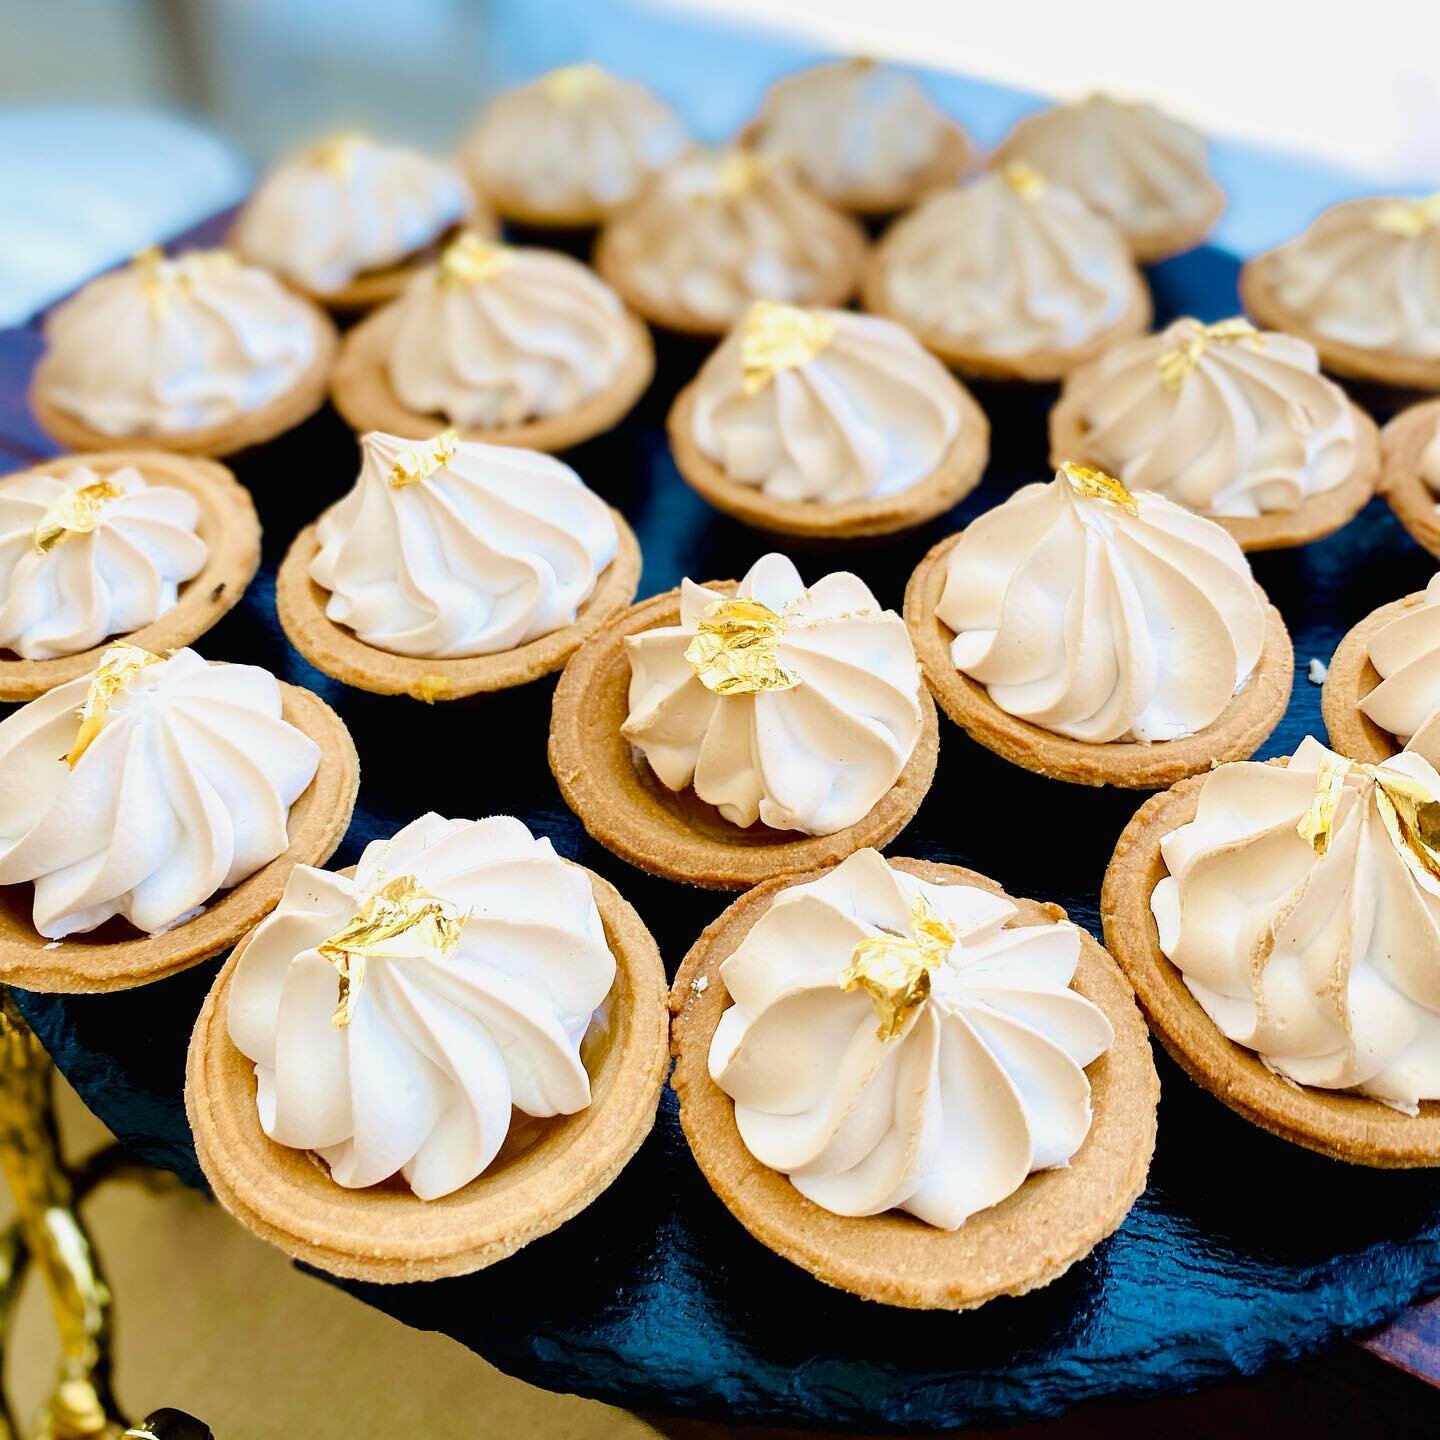 Our Lemon Meringue tartlets are all dressed up and ready to join the party! 🎉🍋

Did you know that you can host your private event at Chase Center? From business lunches to weddings to holiday parties, our catering teams can help curate any event! 
